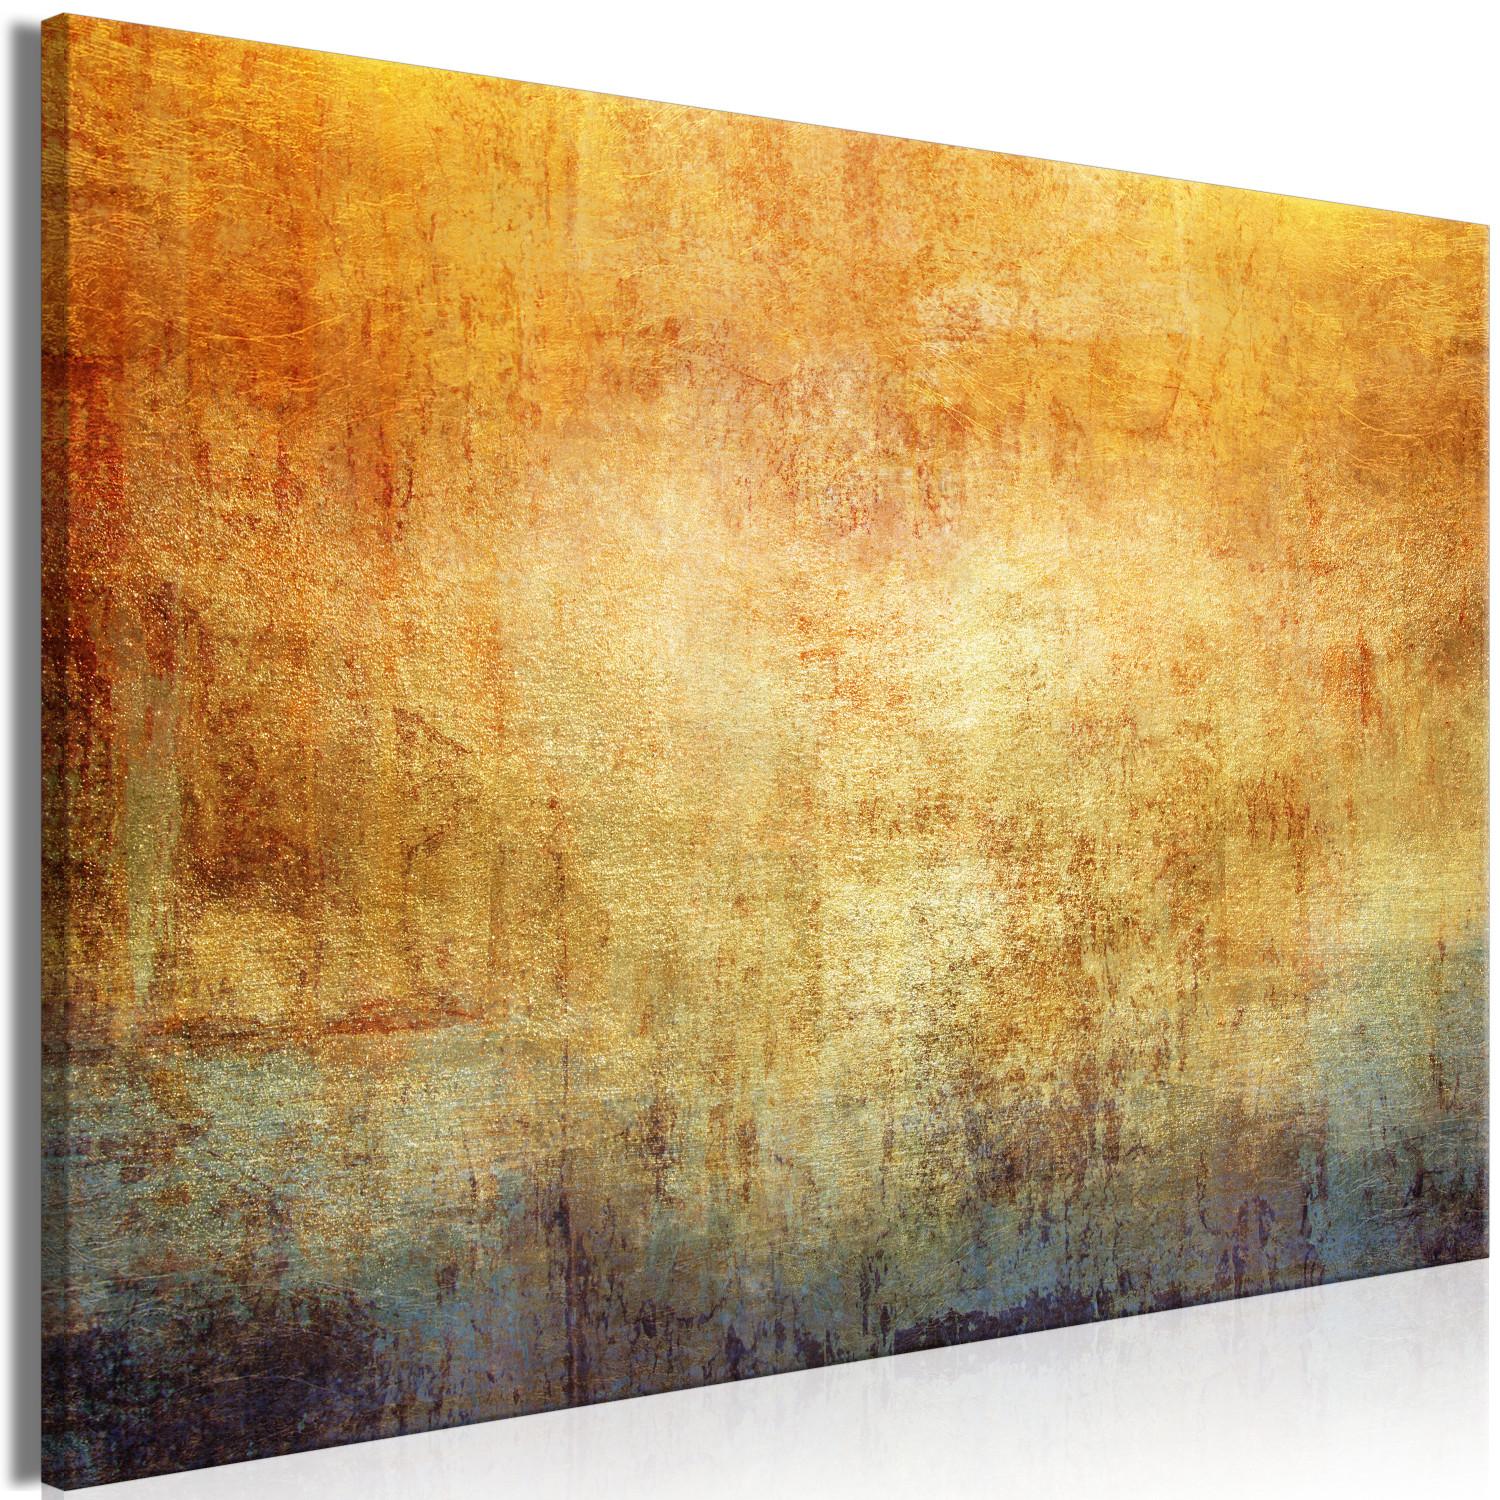 Canvas Expansion of Thoughts (1-piece) Wide - warm-colored abstraction